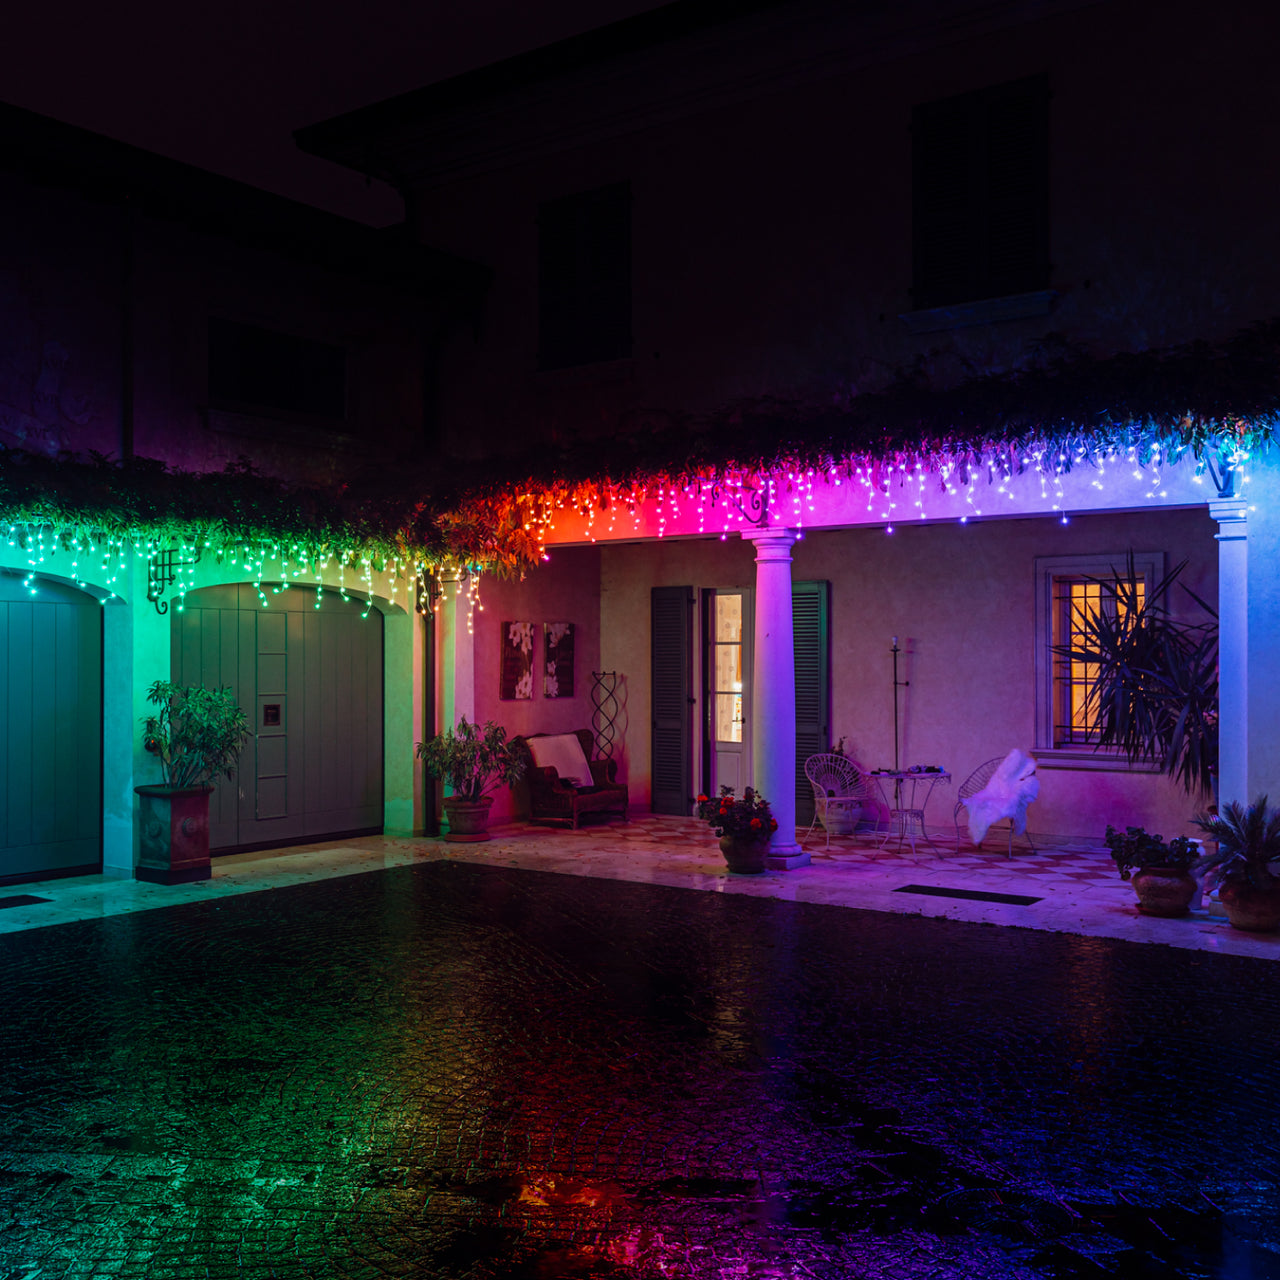 5m 190 LED Twinkly Smart App Controlled Icicle Lights Multi Coloured & White Edition